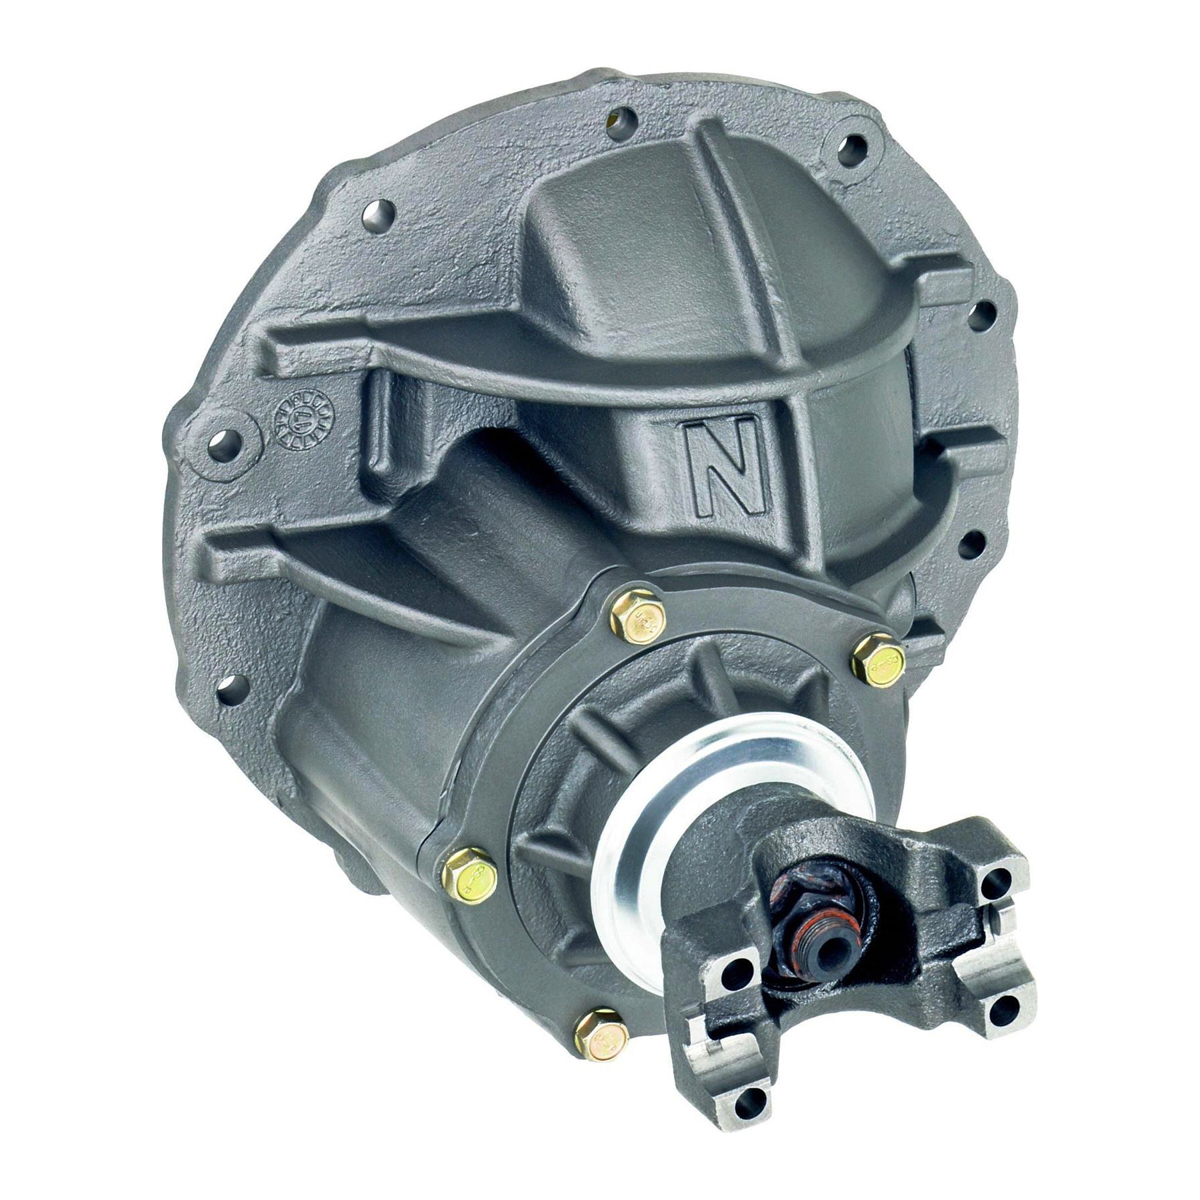 Currie CE-9CT411S Differential Carrier, 4.110 Ratio, 31 Spline, Nodular Iron, Natural, Ford 9 in, Each